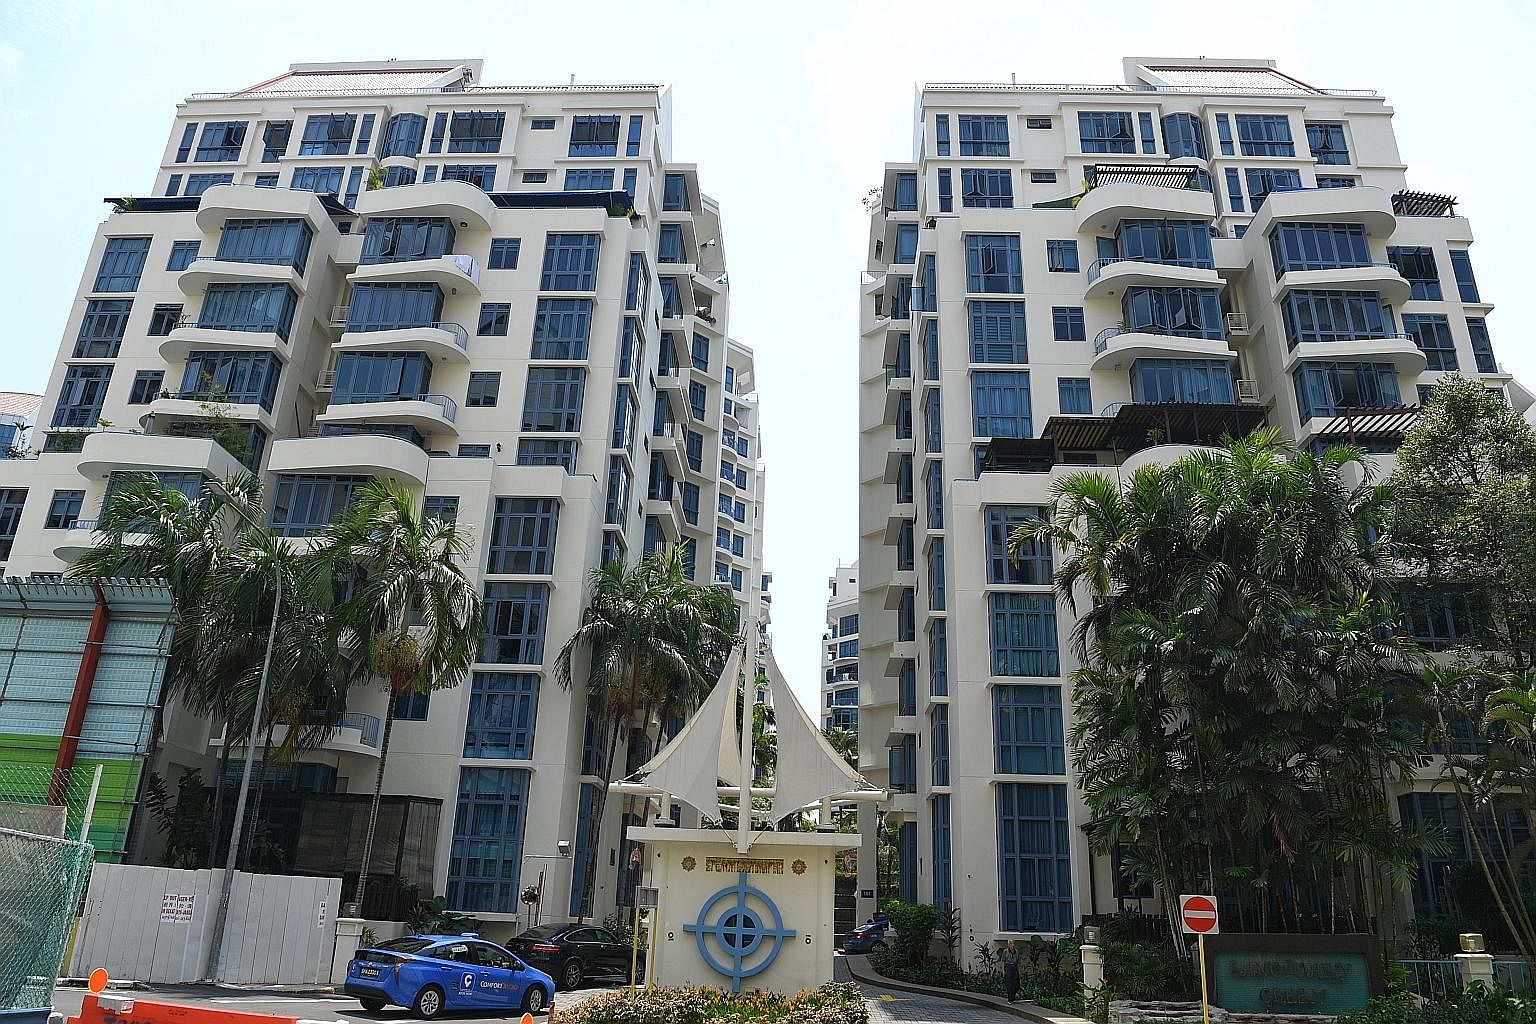 The management corporation of Sanctuary Green in Tanjong Rhu sought to force the sale of a unit whose owner is said to be owing more than $10,000 in management and sinking-fund fees, plus interest.